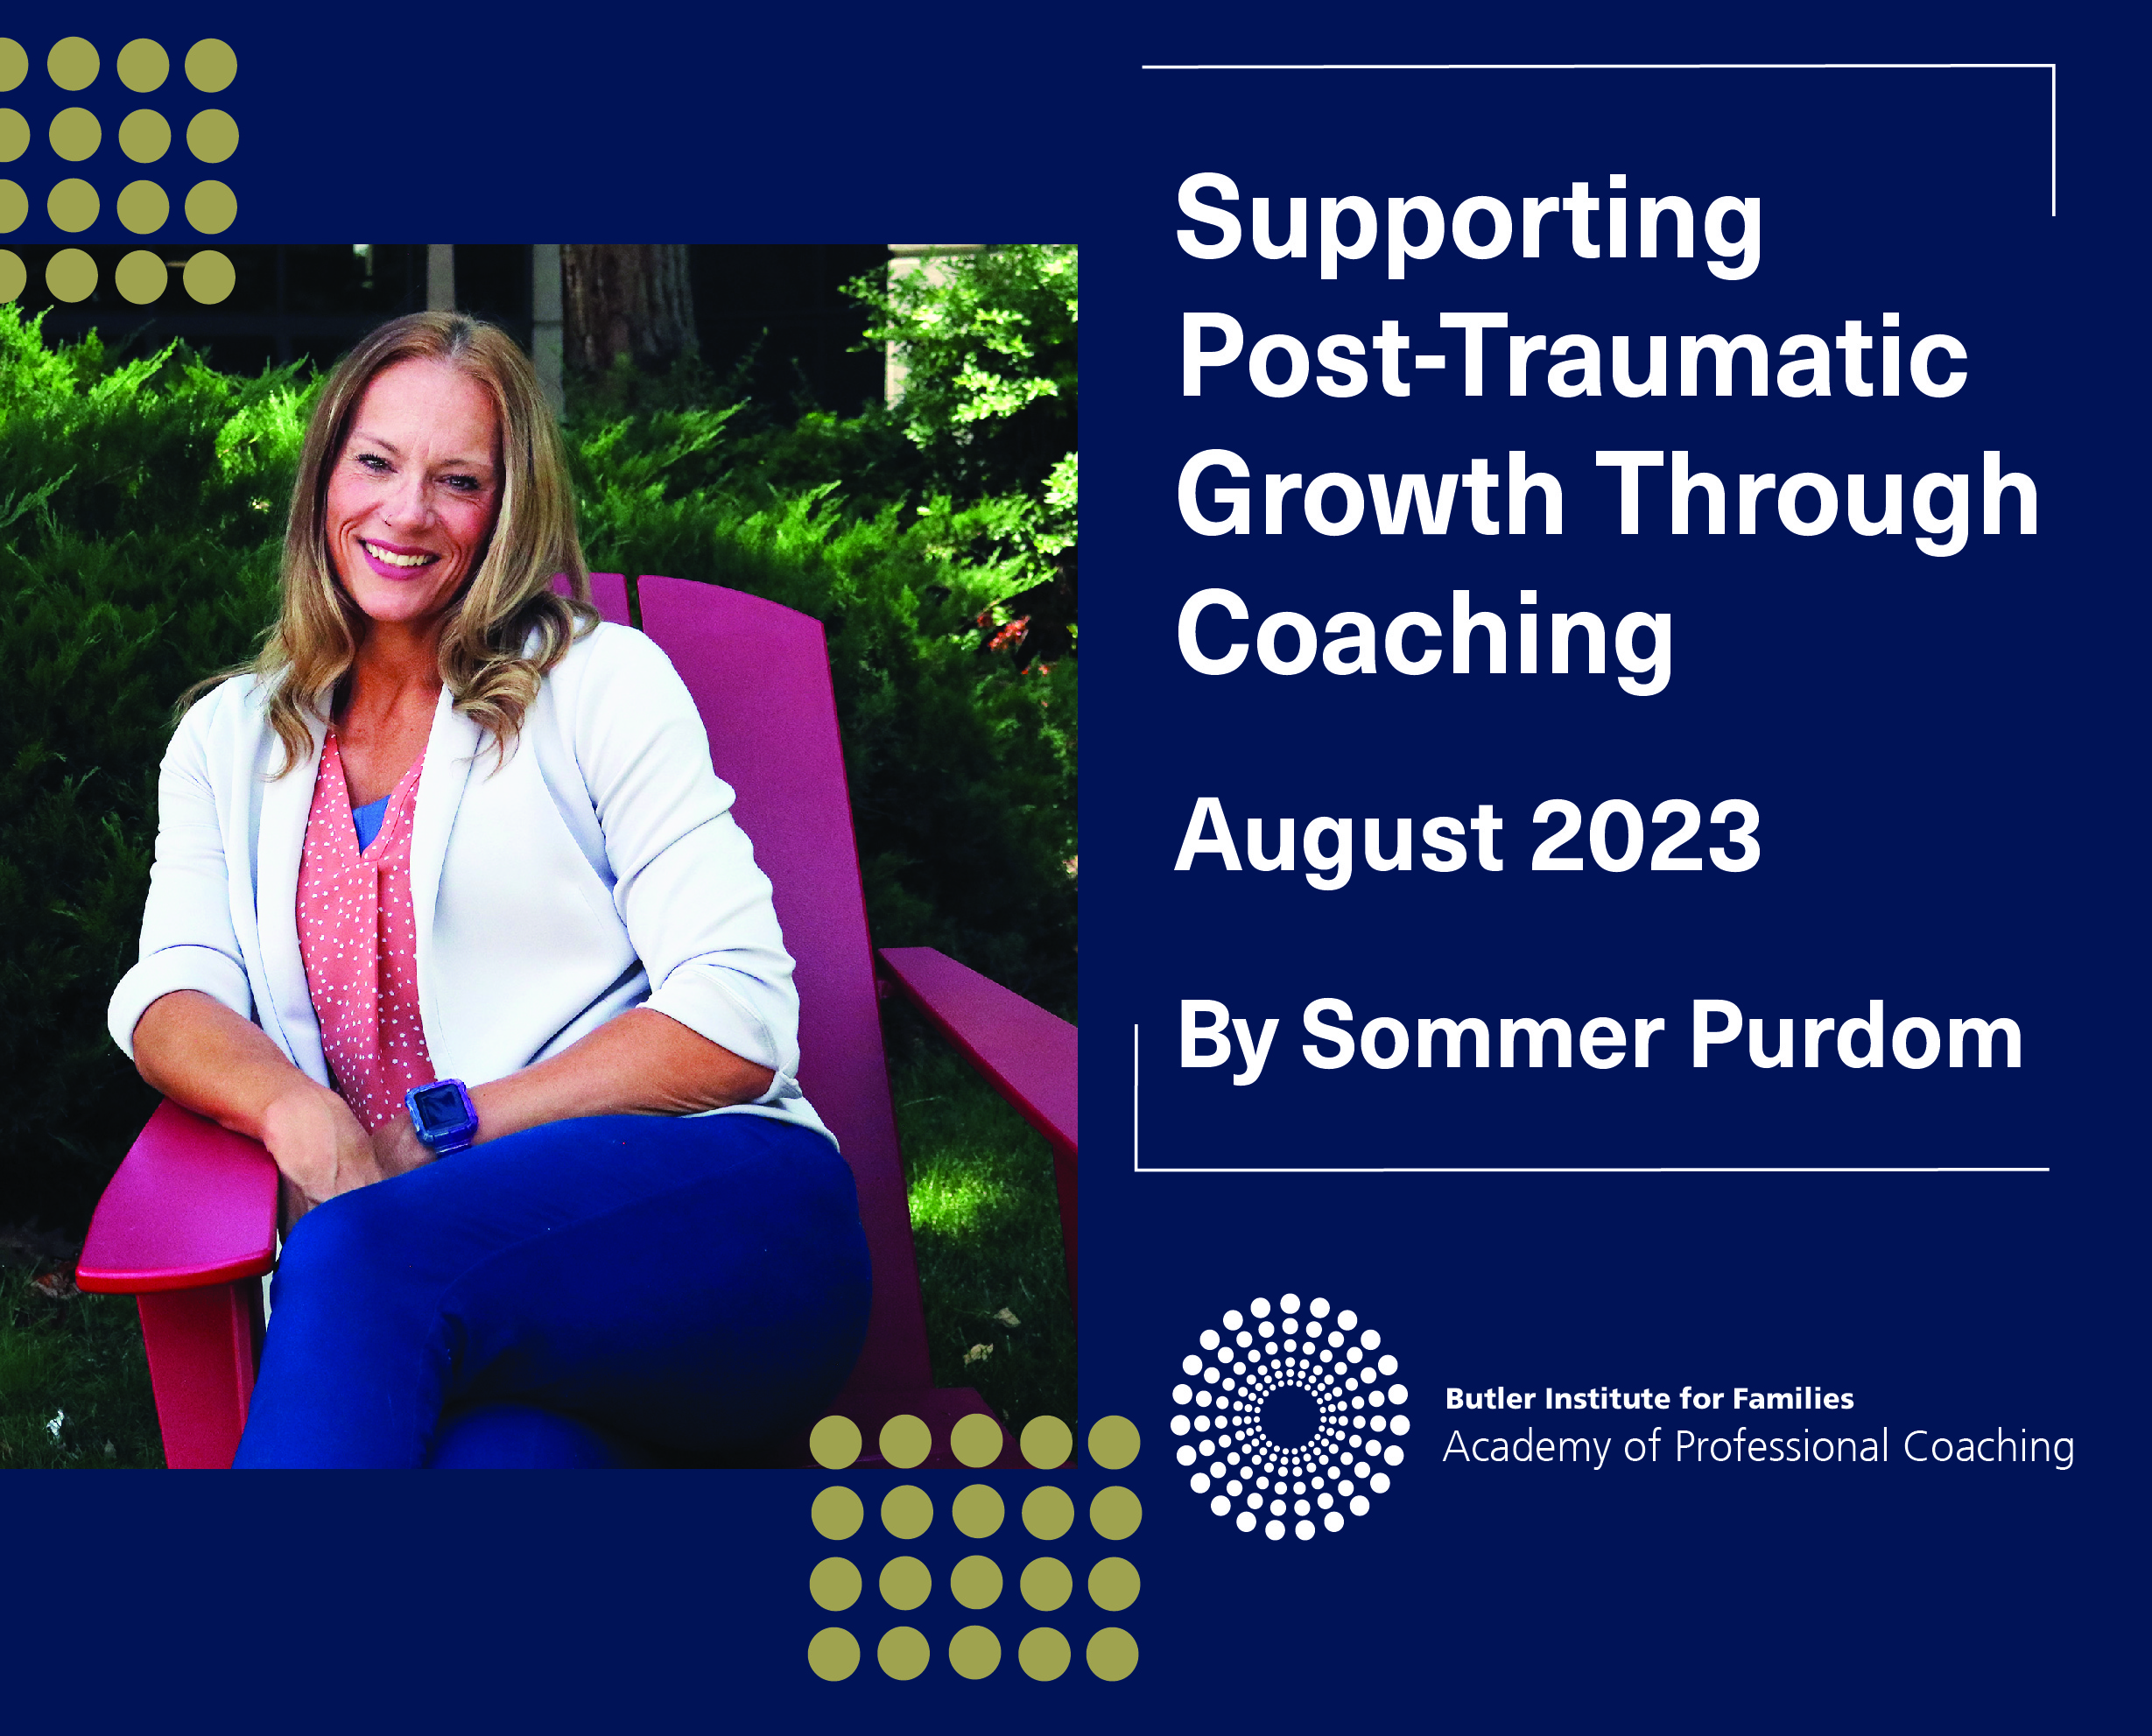 Supporting Post-Traumatic Growth Through Coaching quote